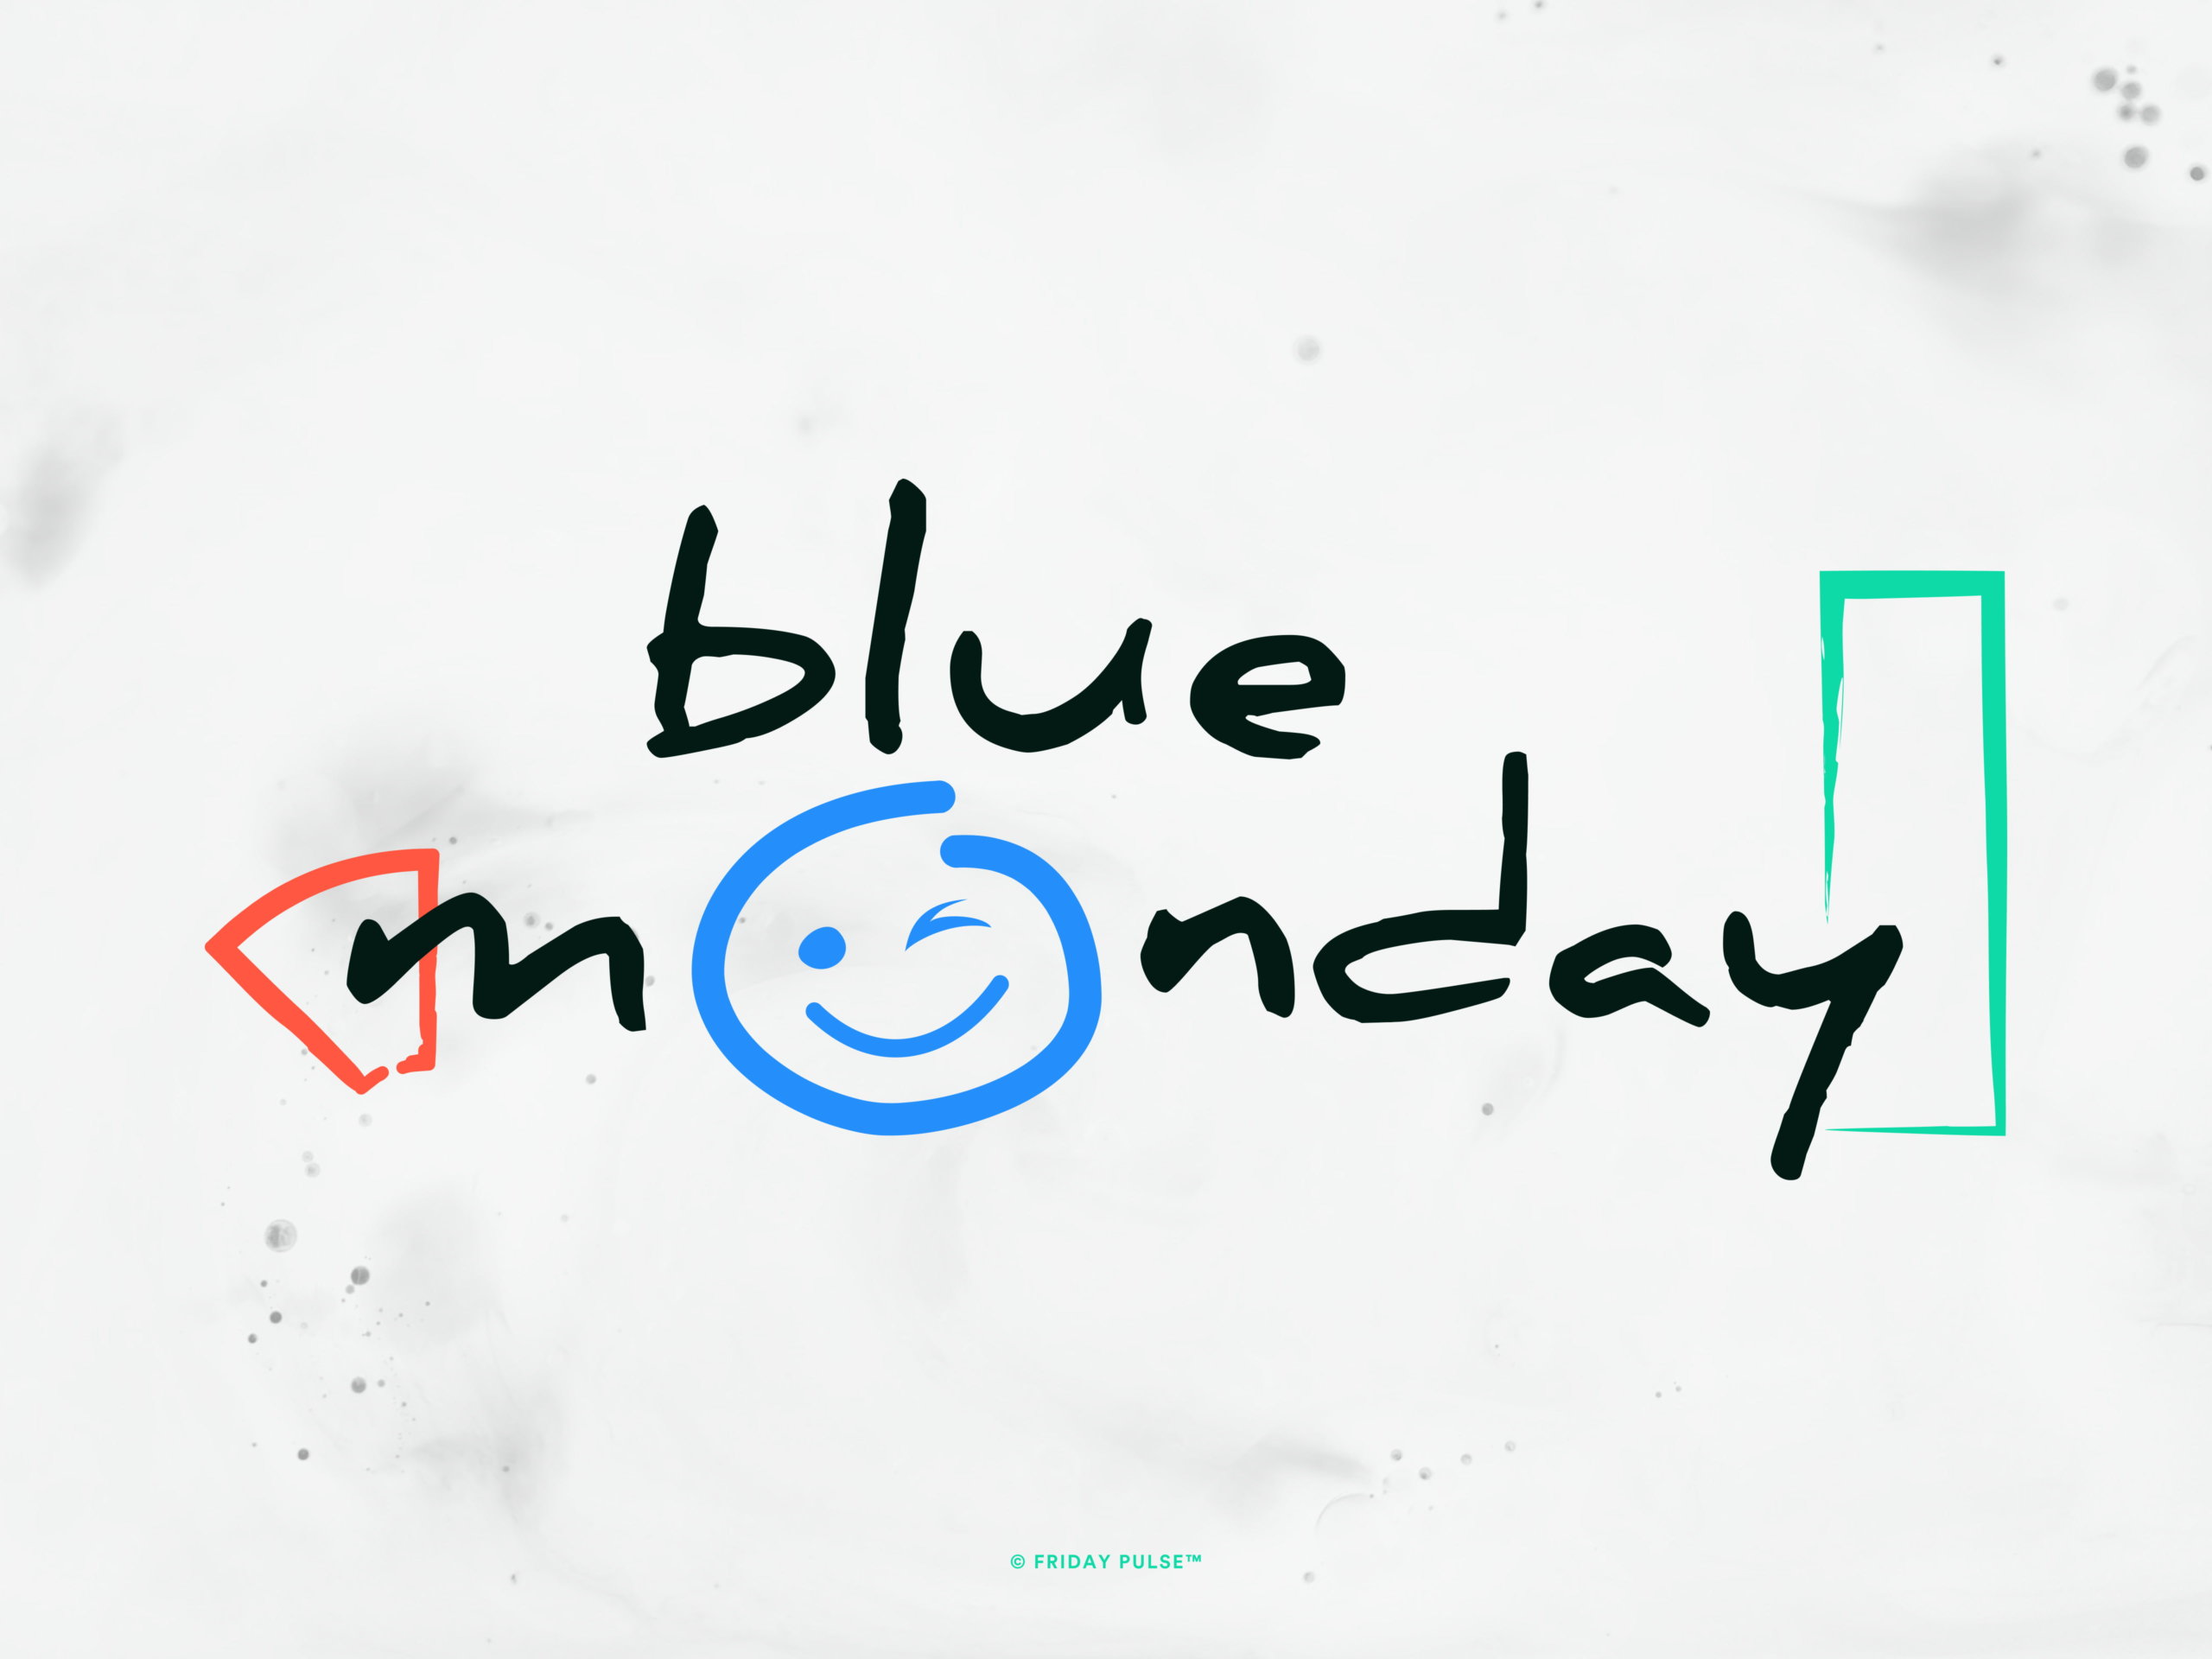 How to Beat the Blue Monday Blues and Improve Your Culture